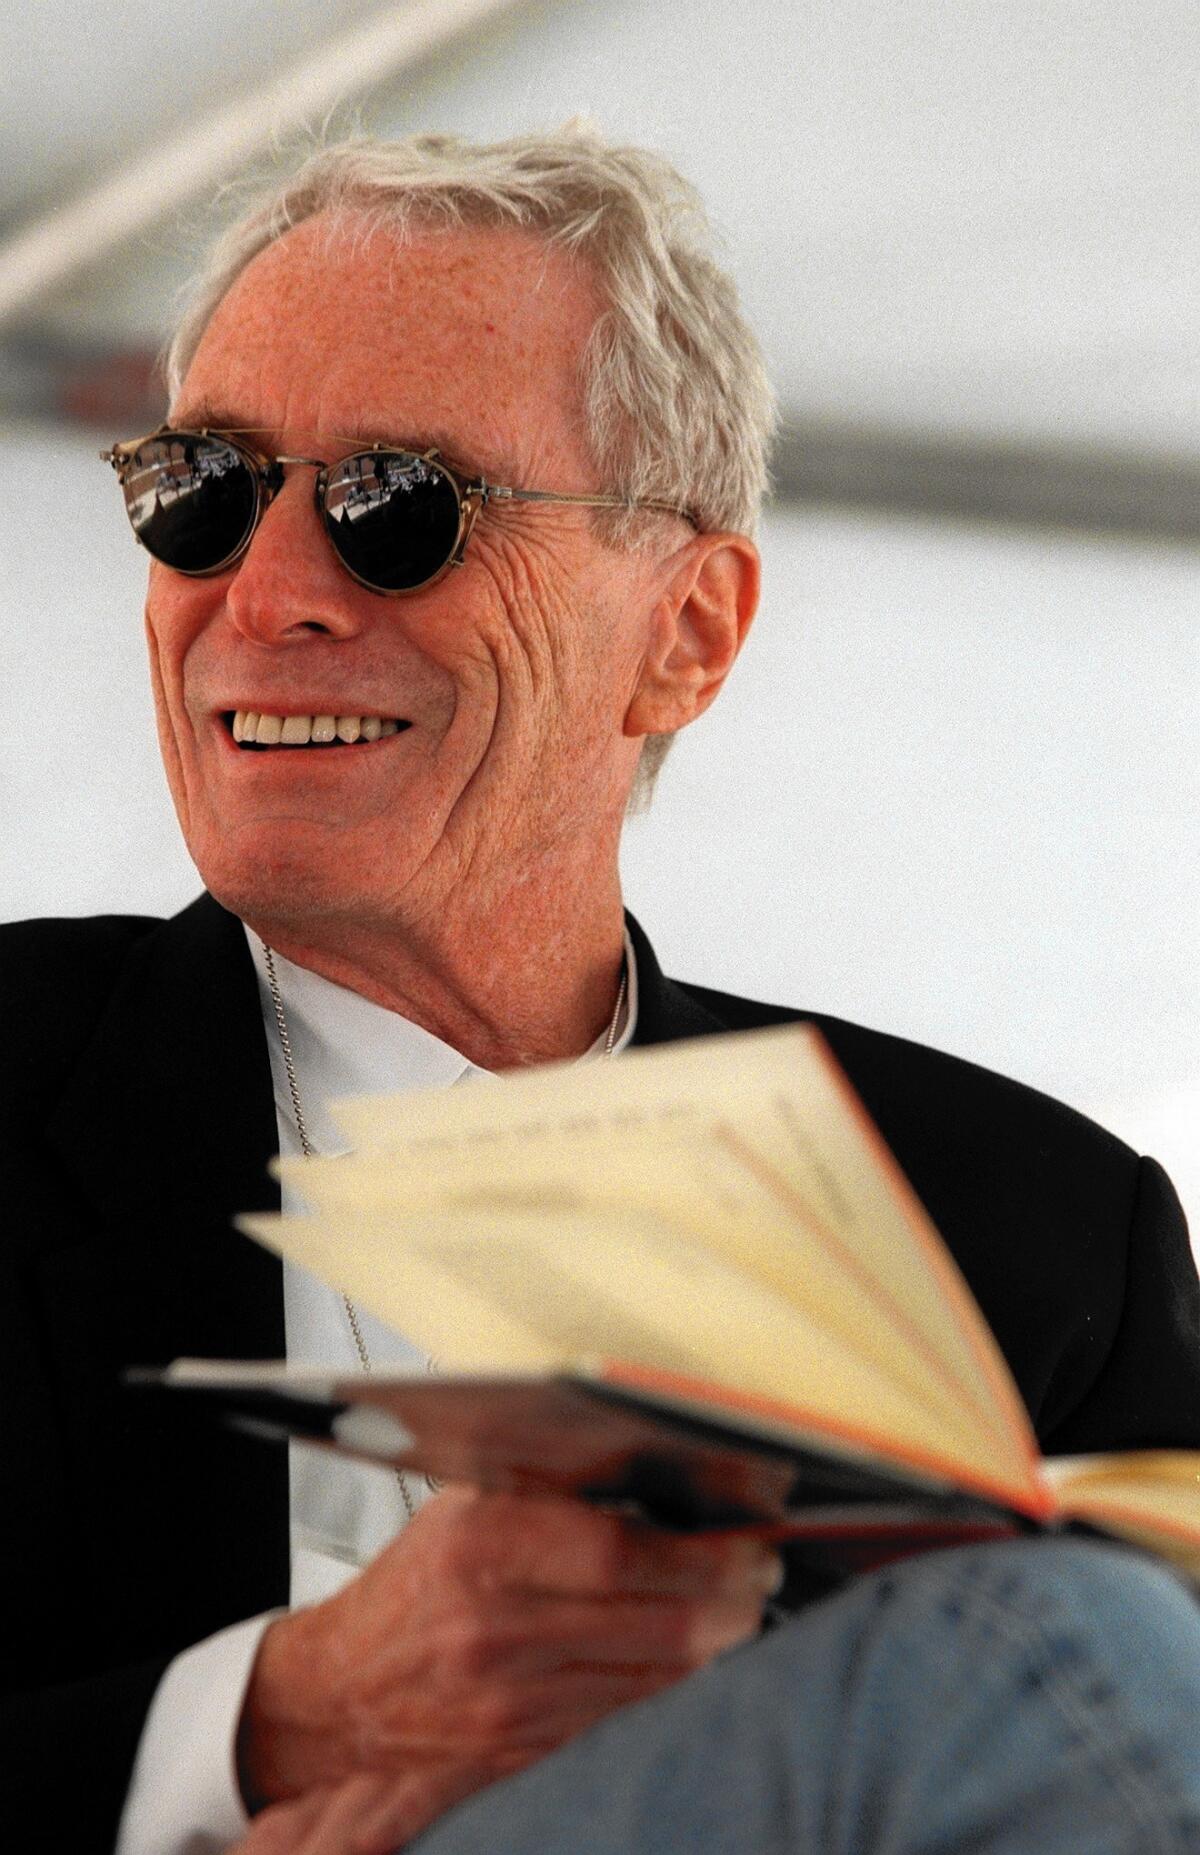 Poet Mark Strand at the Los Angeles Times Festival of Books in 1999. From the beginning of his career, Strand was haunted by absence, loss and the passage of time.